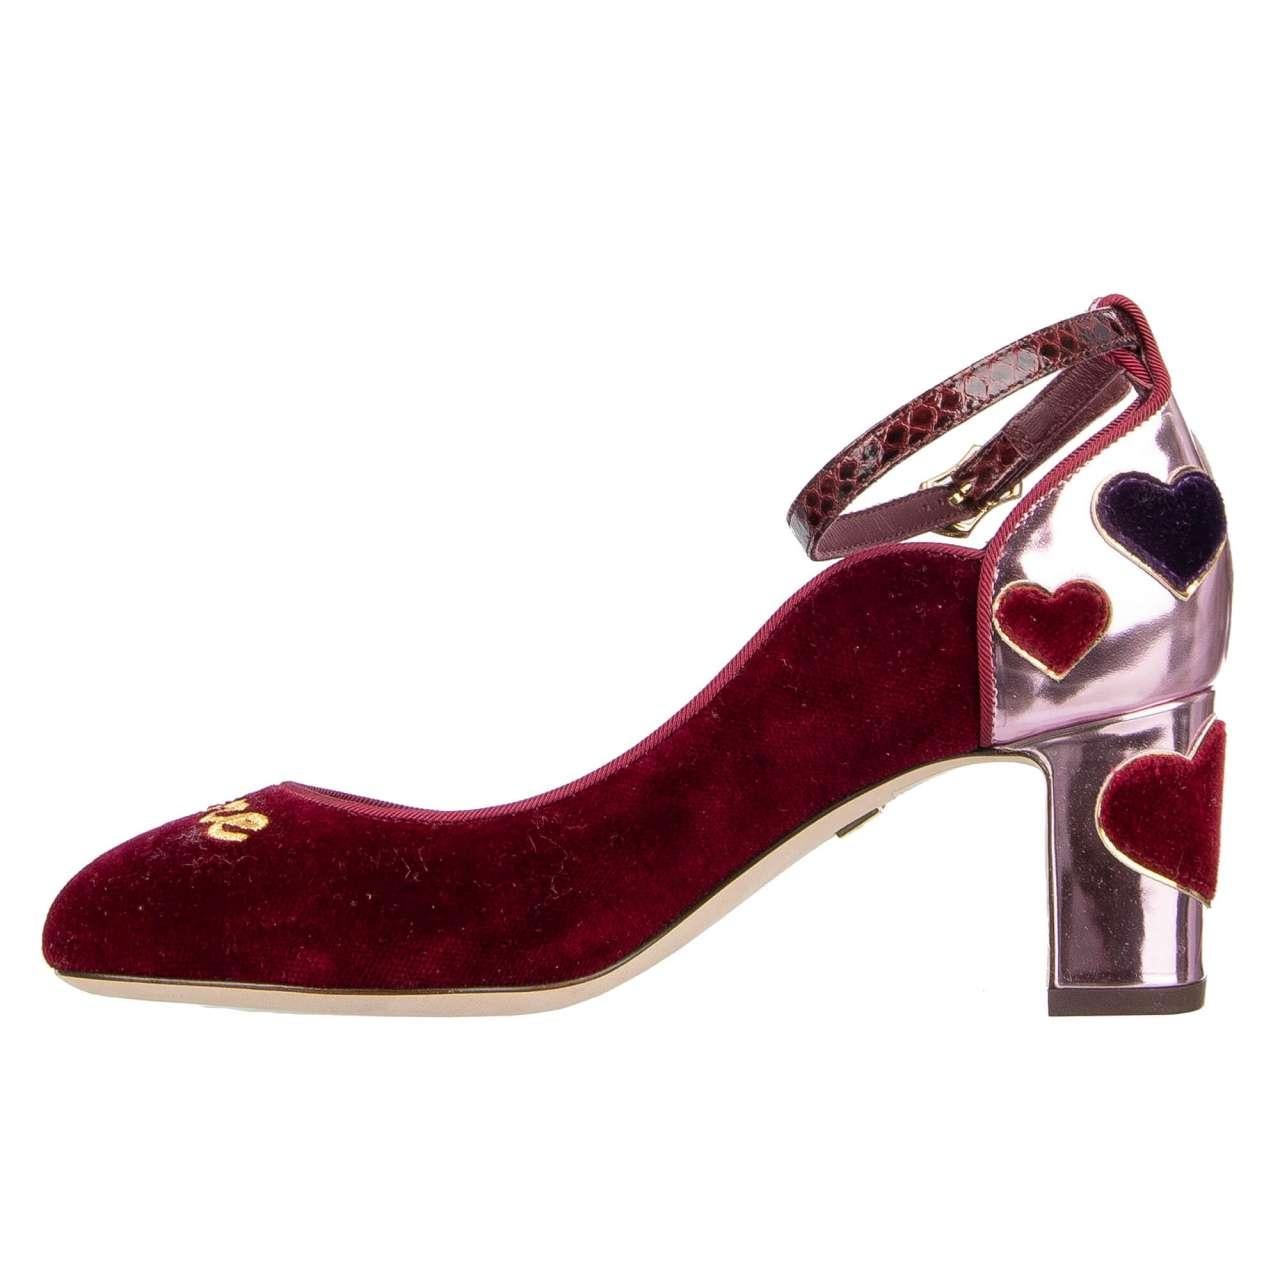 - Velvet Ankle Strap Pumps VALLY in red and pink with gold embroidered L'Amore, hearts embellished block heel and snakeskin ankle strap by DOLCE & GABBANA - New with Box - MADE IN ITALY - Former RRP: EUR 745 - Gold Embroidered 